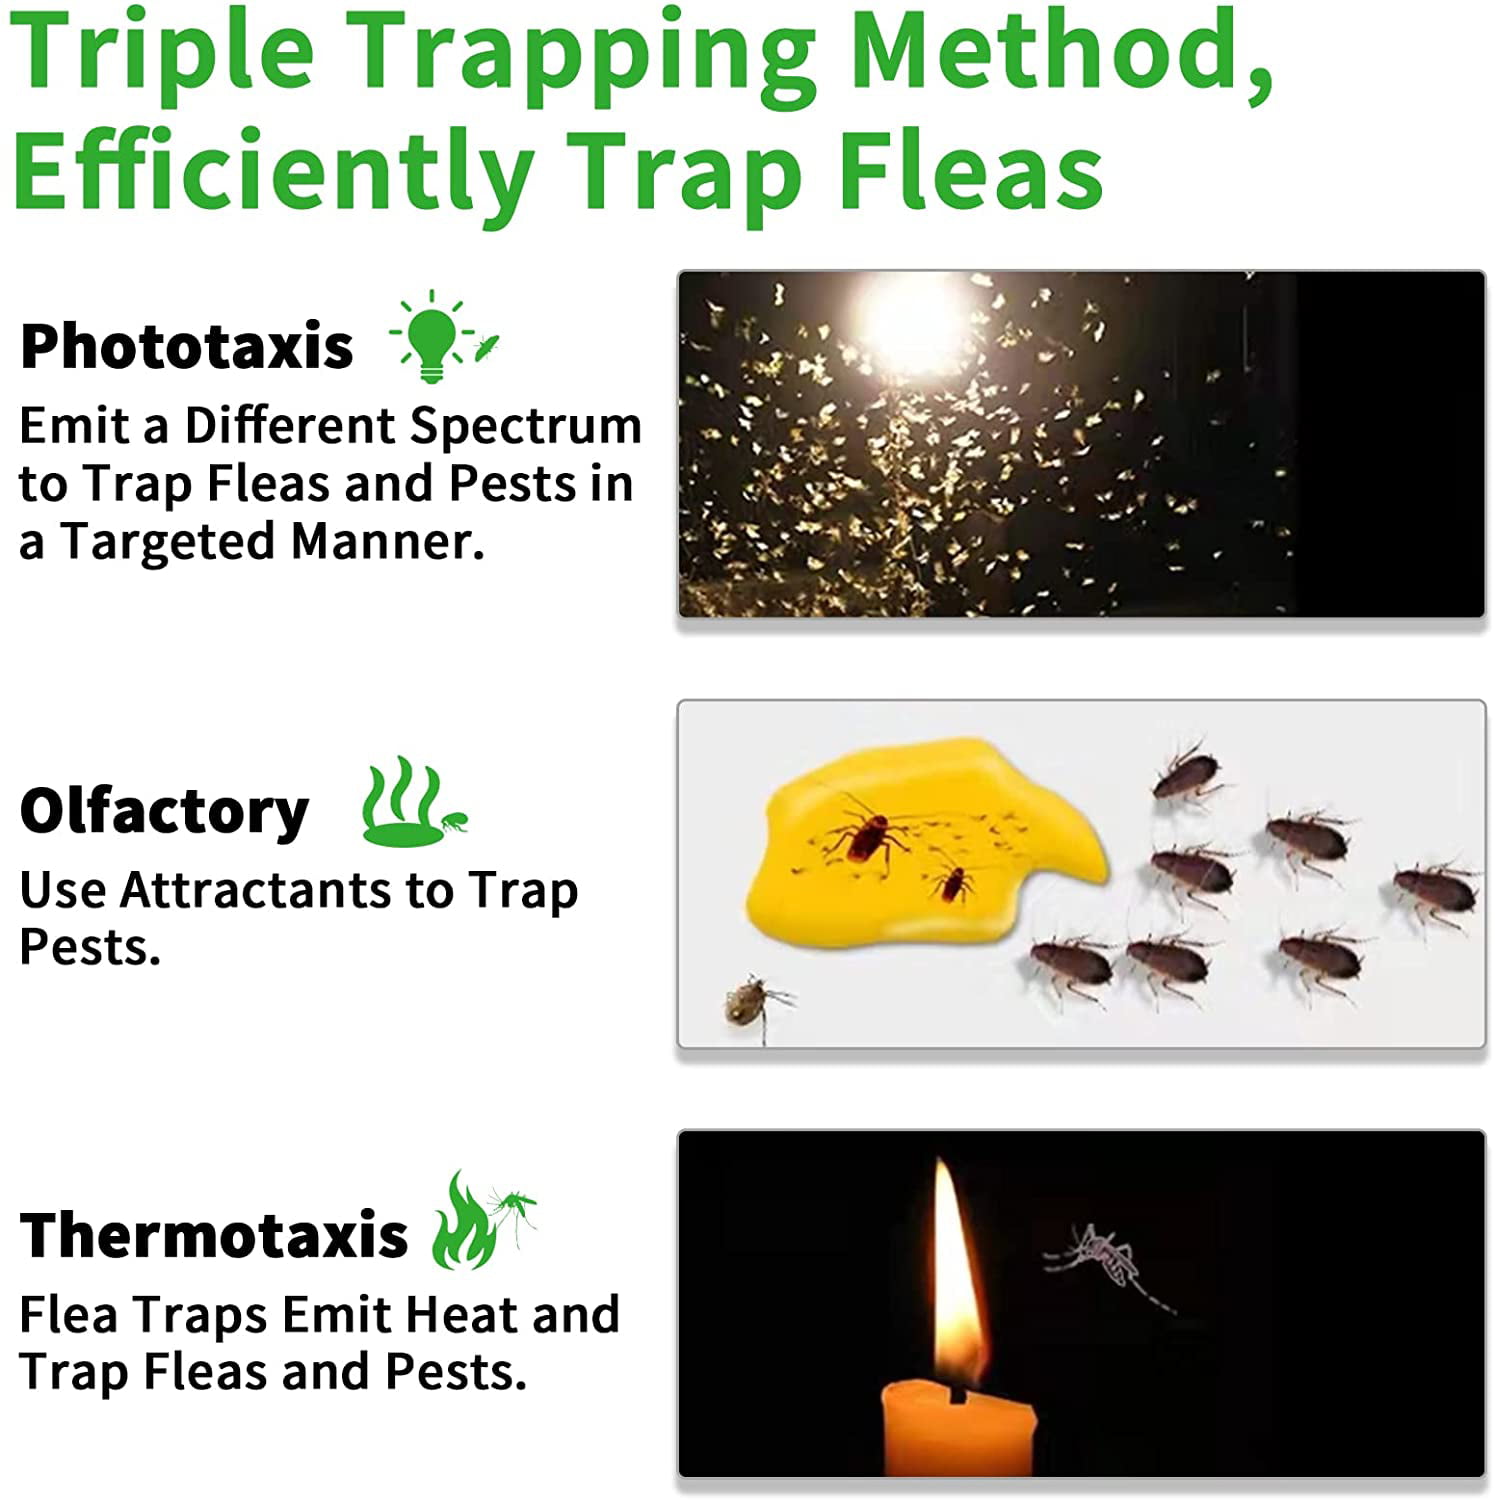  BugMD Termination Station Pest Trapper - Flea Trap with Light  and Refills, Sticky Trap for Ants, Cockroaches, Tick and Flea, Bug Catcher,  Roach Trap : Patio, Lawn & Garden